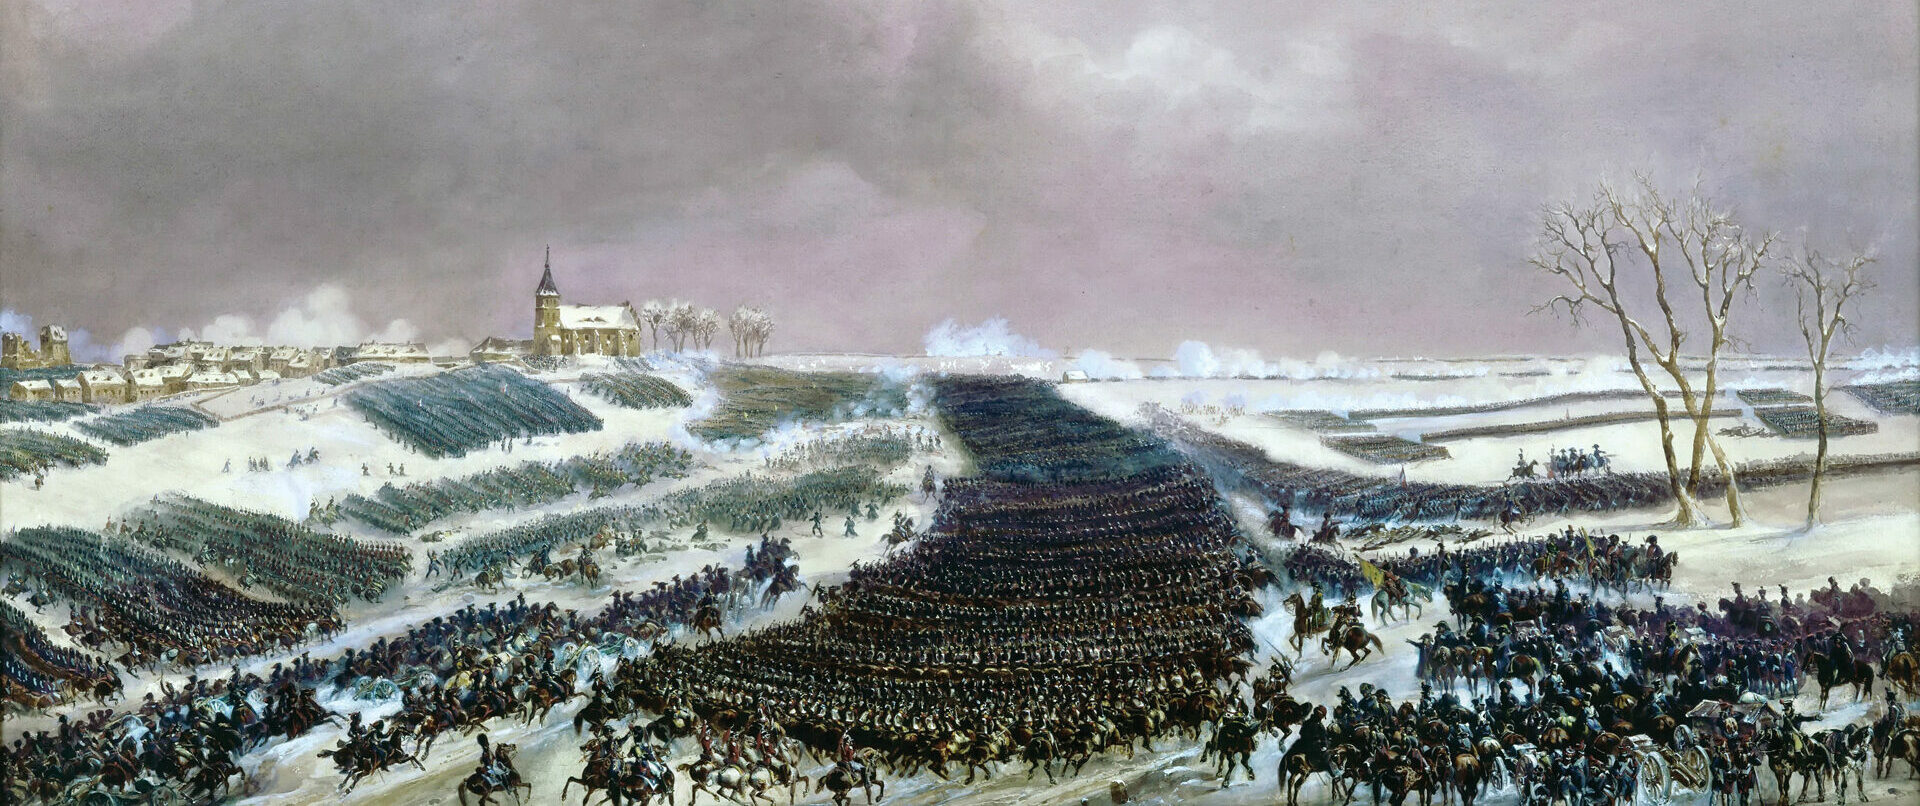 Napoleon answered the Russian counterattack that threatened his center by hurling Marshal Jean Murat’s 10,000 cavalrymen in an epic charge that bought him valuable time for reinforcements to arrive. 